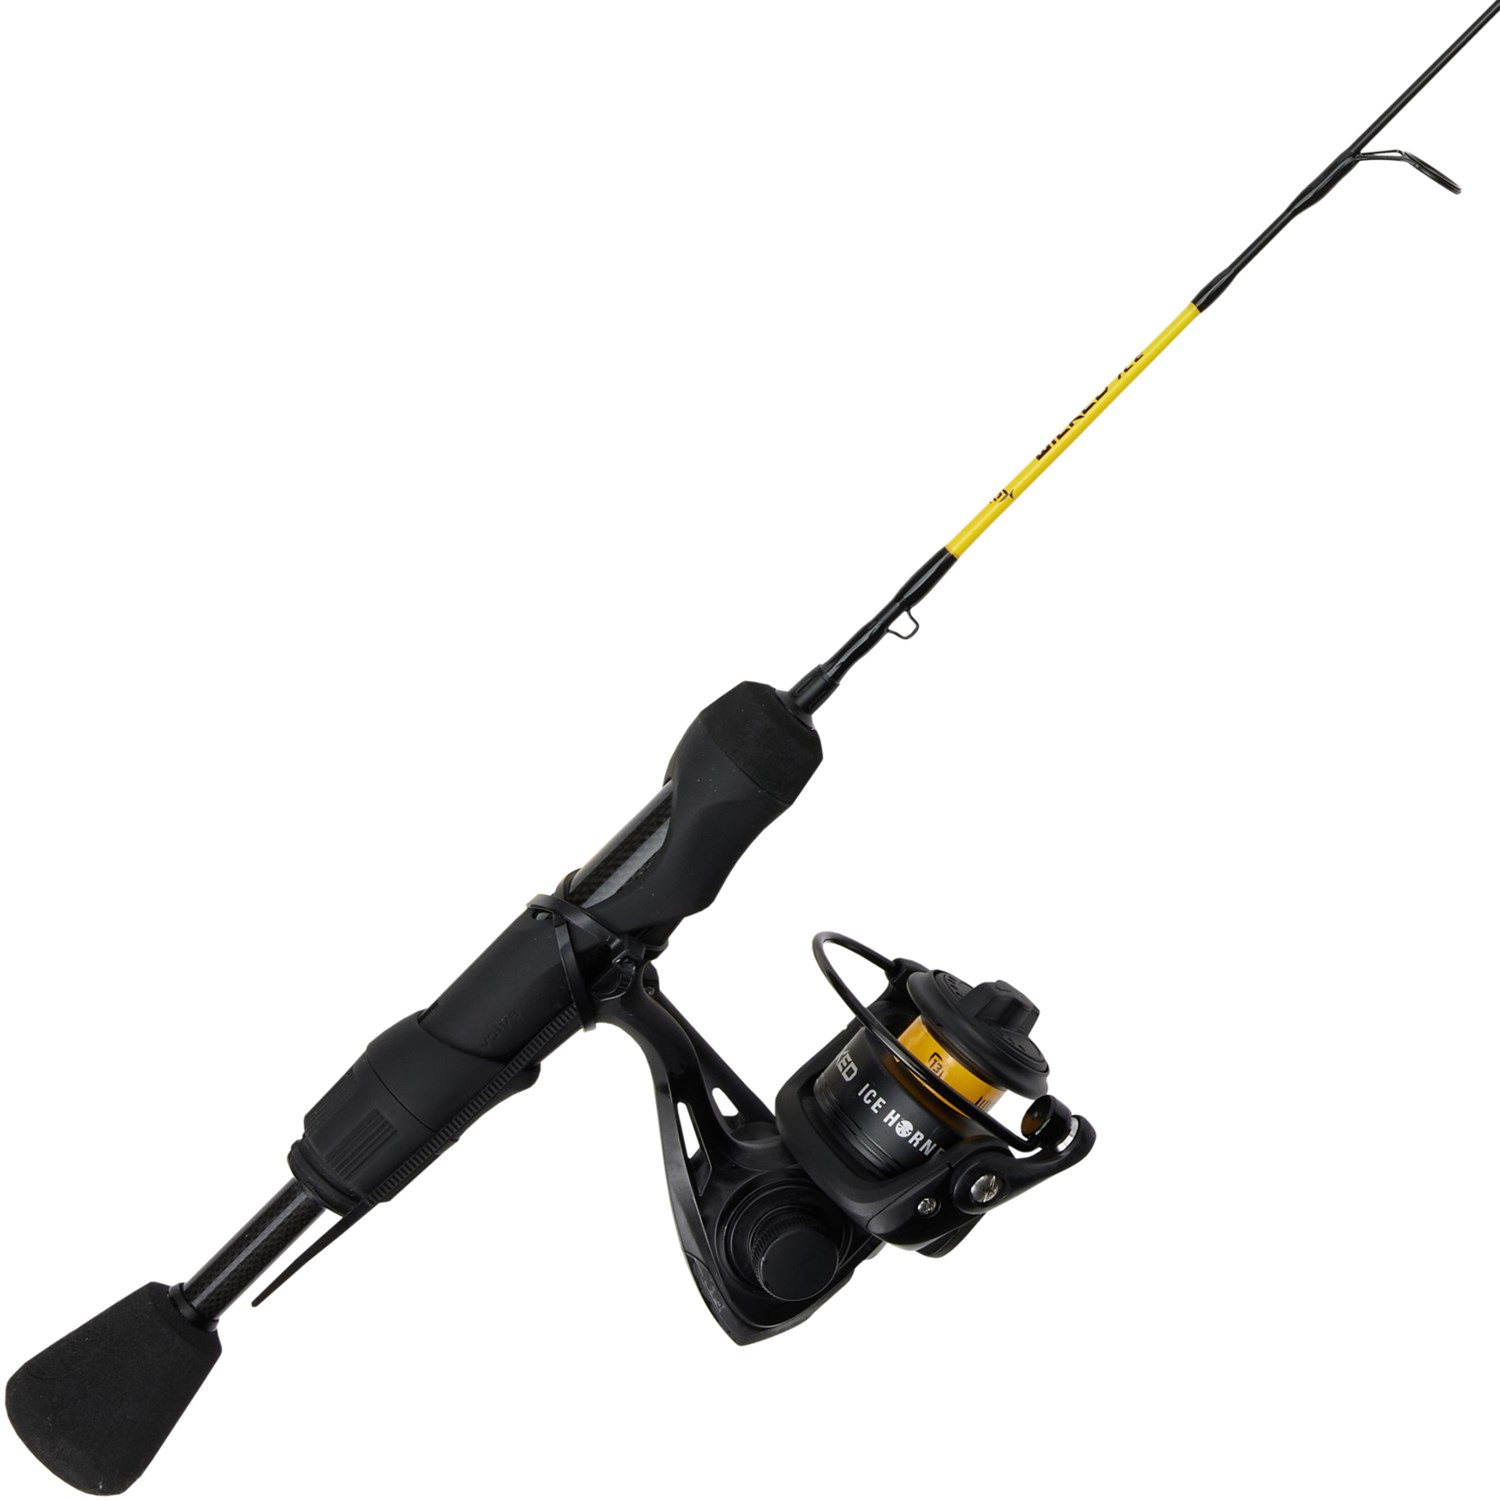 13 Fishing Wicked Ice Hornet Lightweight Rod and Reel Combo - 30” - Save 44%